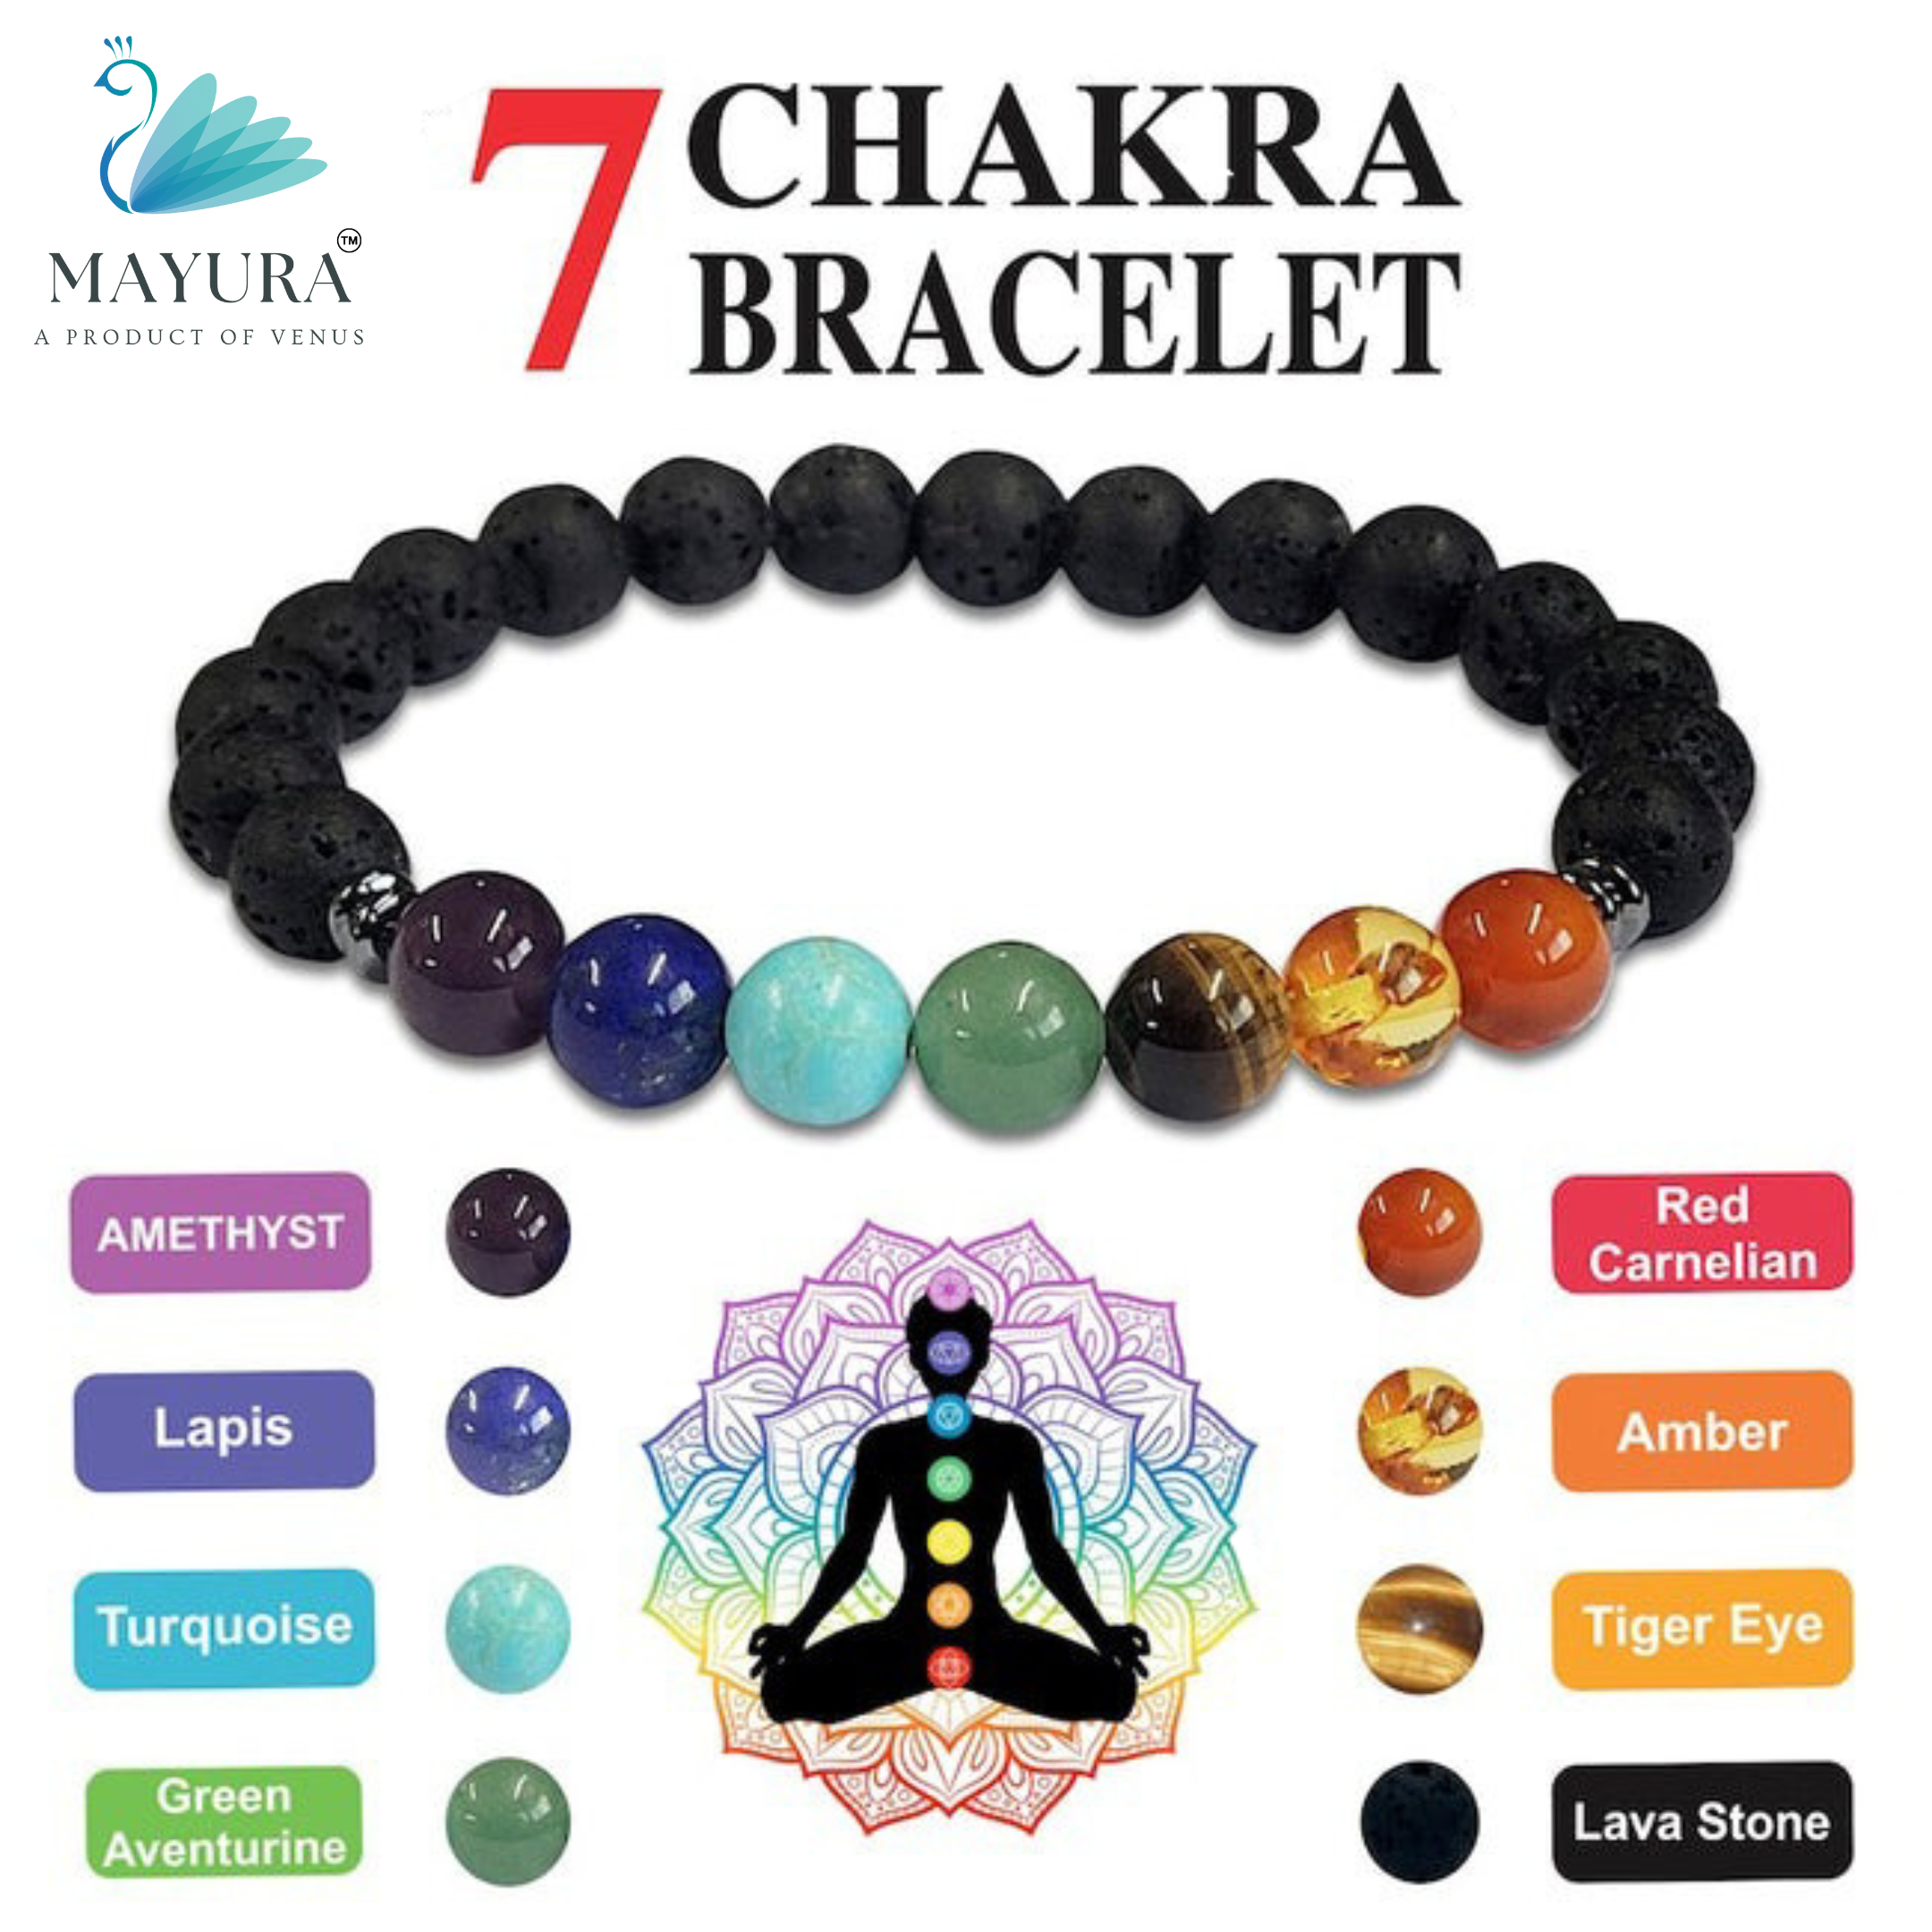 7 Chakra Bracelet With Meaning Card Natural Crystal Healing - Etsy